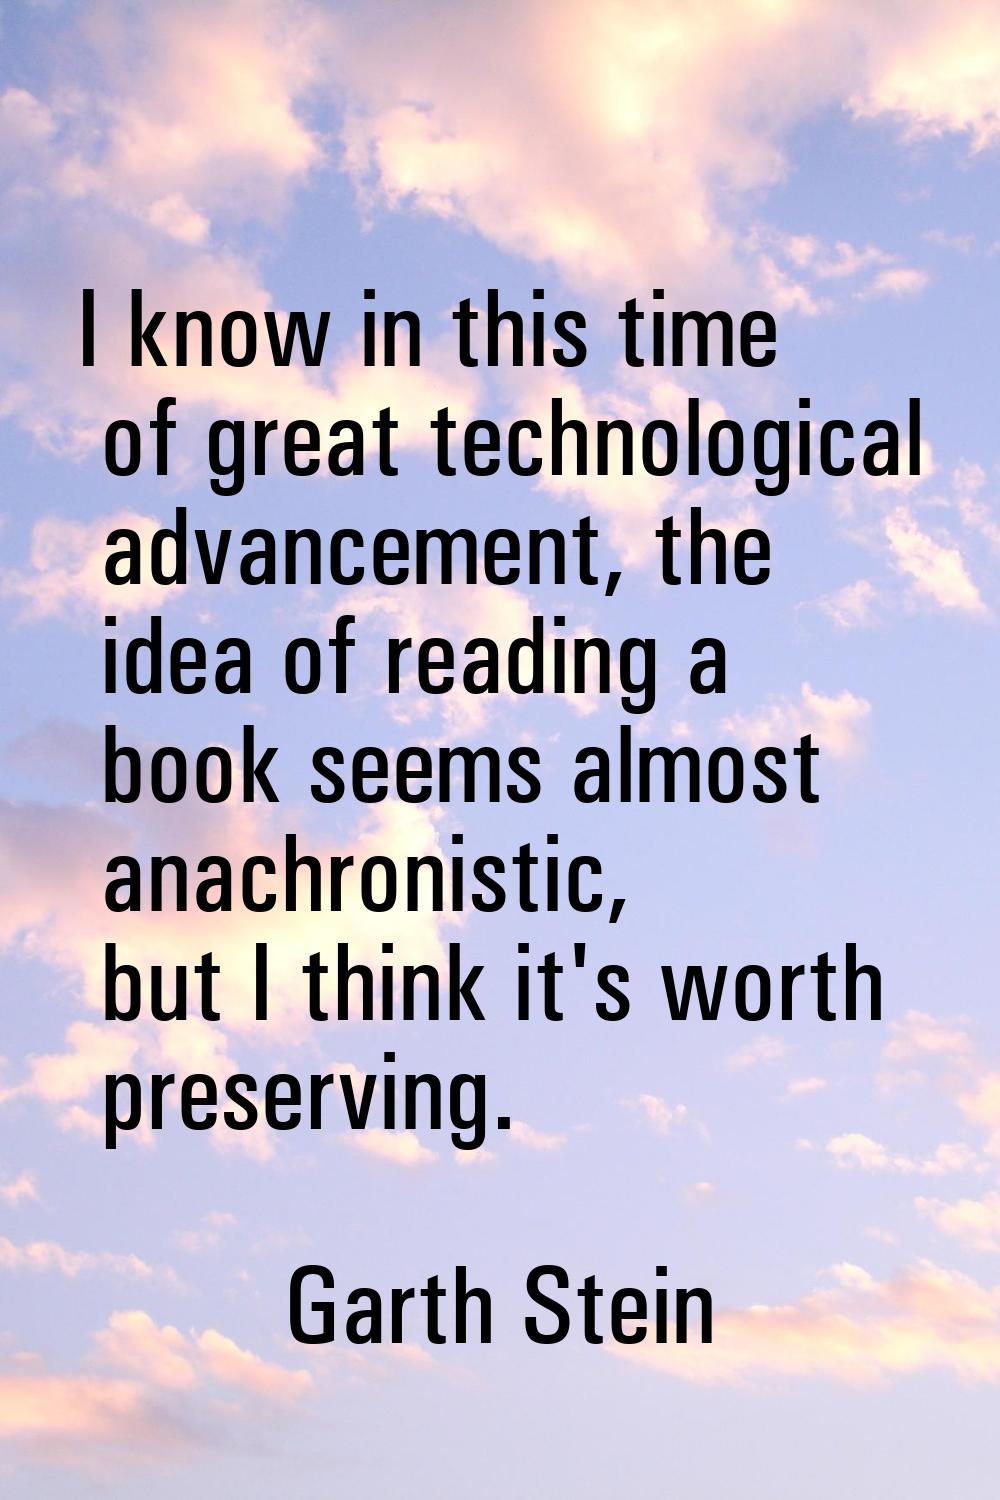 I know in this time of great technological advancement, the idea of reading a book seems almost ana